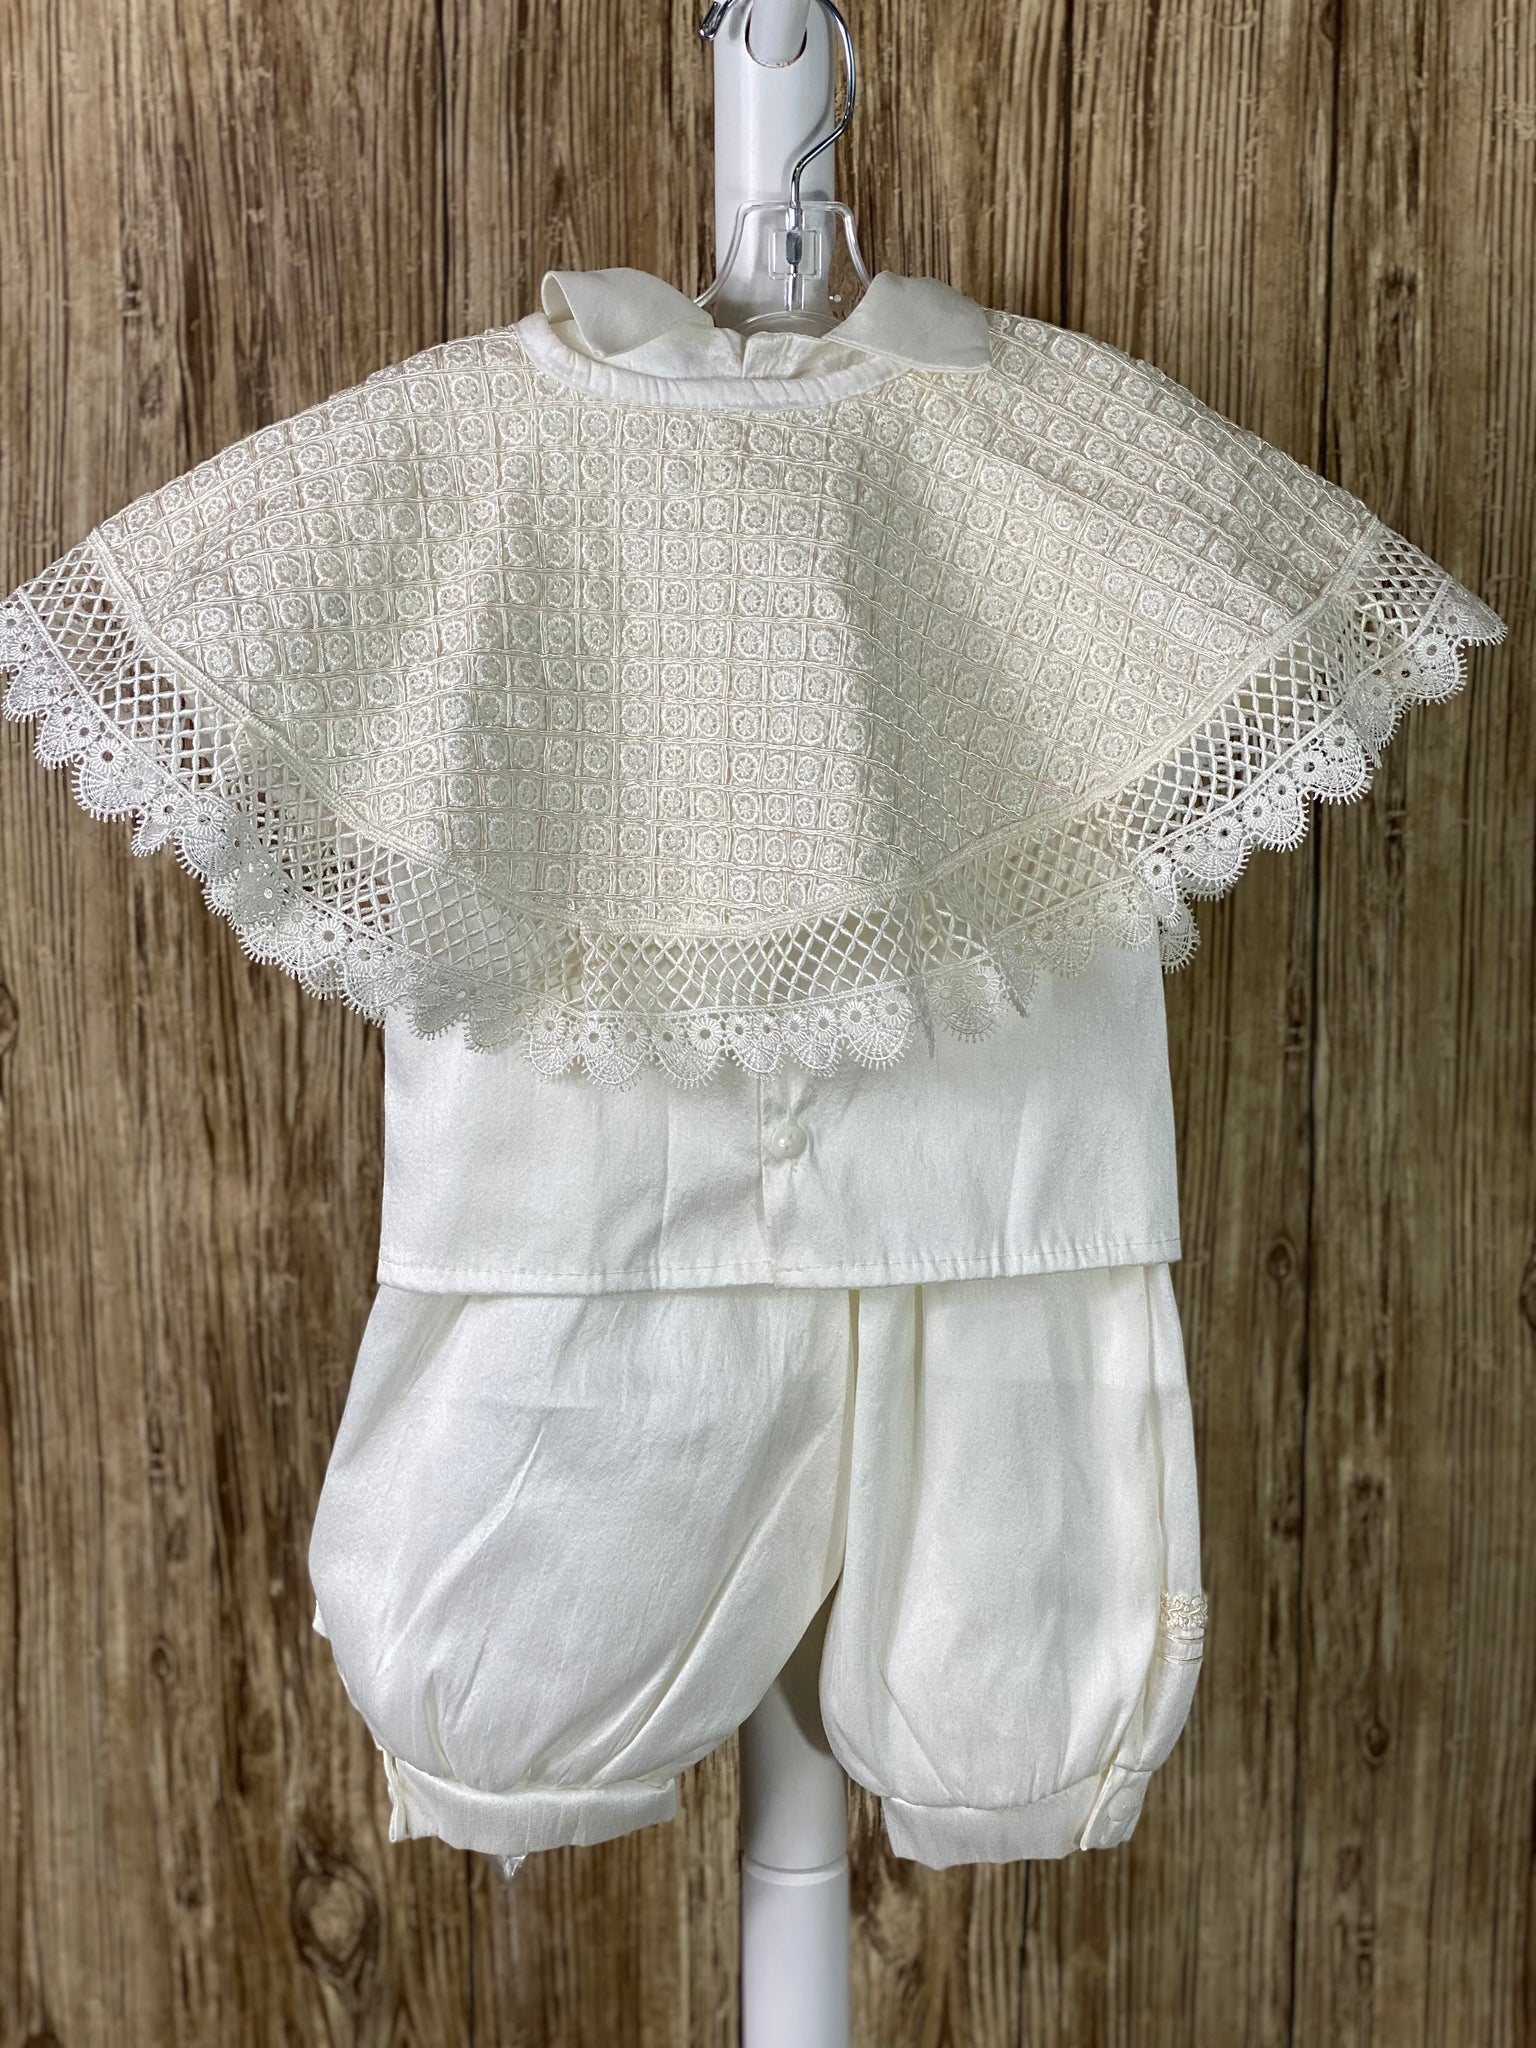 IVORY   4-piece ivory set including mozzetta, beret, shirt, suspender pants Collared romper with short sleeves Buttoning on pant cuffs Button closure on back of shirt Pin tucks overlapping diagonal with pin wheel detailing inside on mozzetta Wide embroidered lace trim around mozzetta Pearl and champagne jeweled crosses on mozzetta Rope closure on mozzetta Braided embroidered line detailing on pant, cummerbund, sleeves, beret, and down shirt center